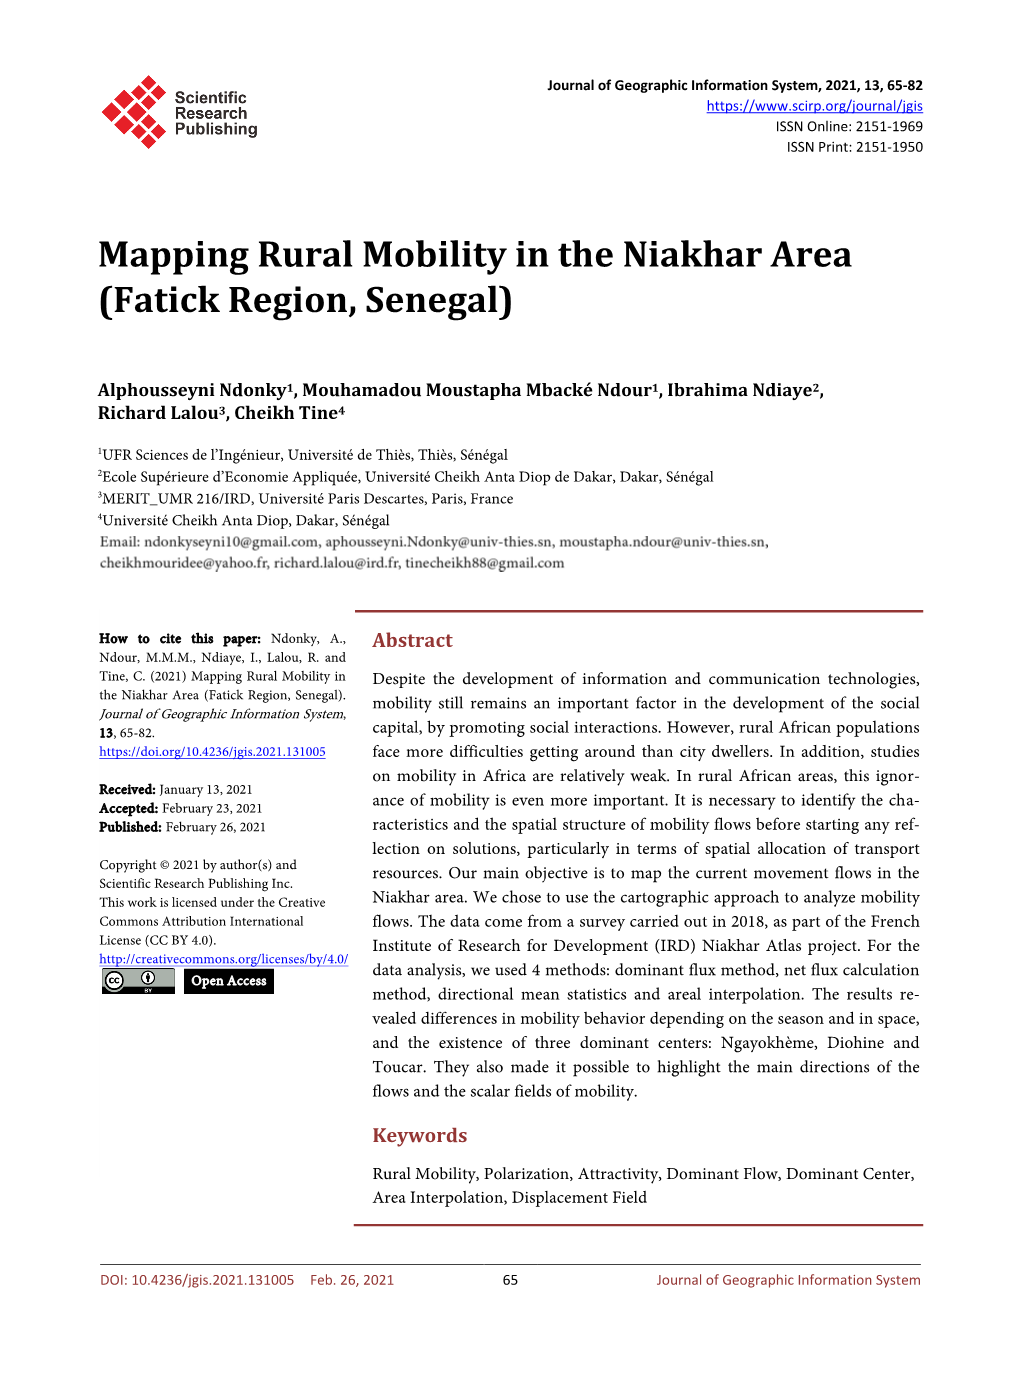 Mapping Rural Mobility in the Niakhar Area (Fatick Region, Senegal)